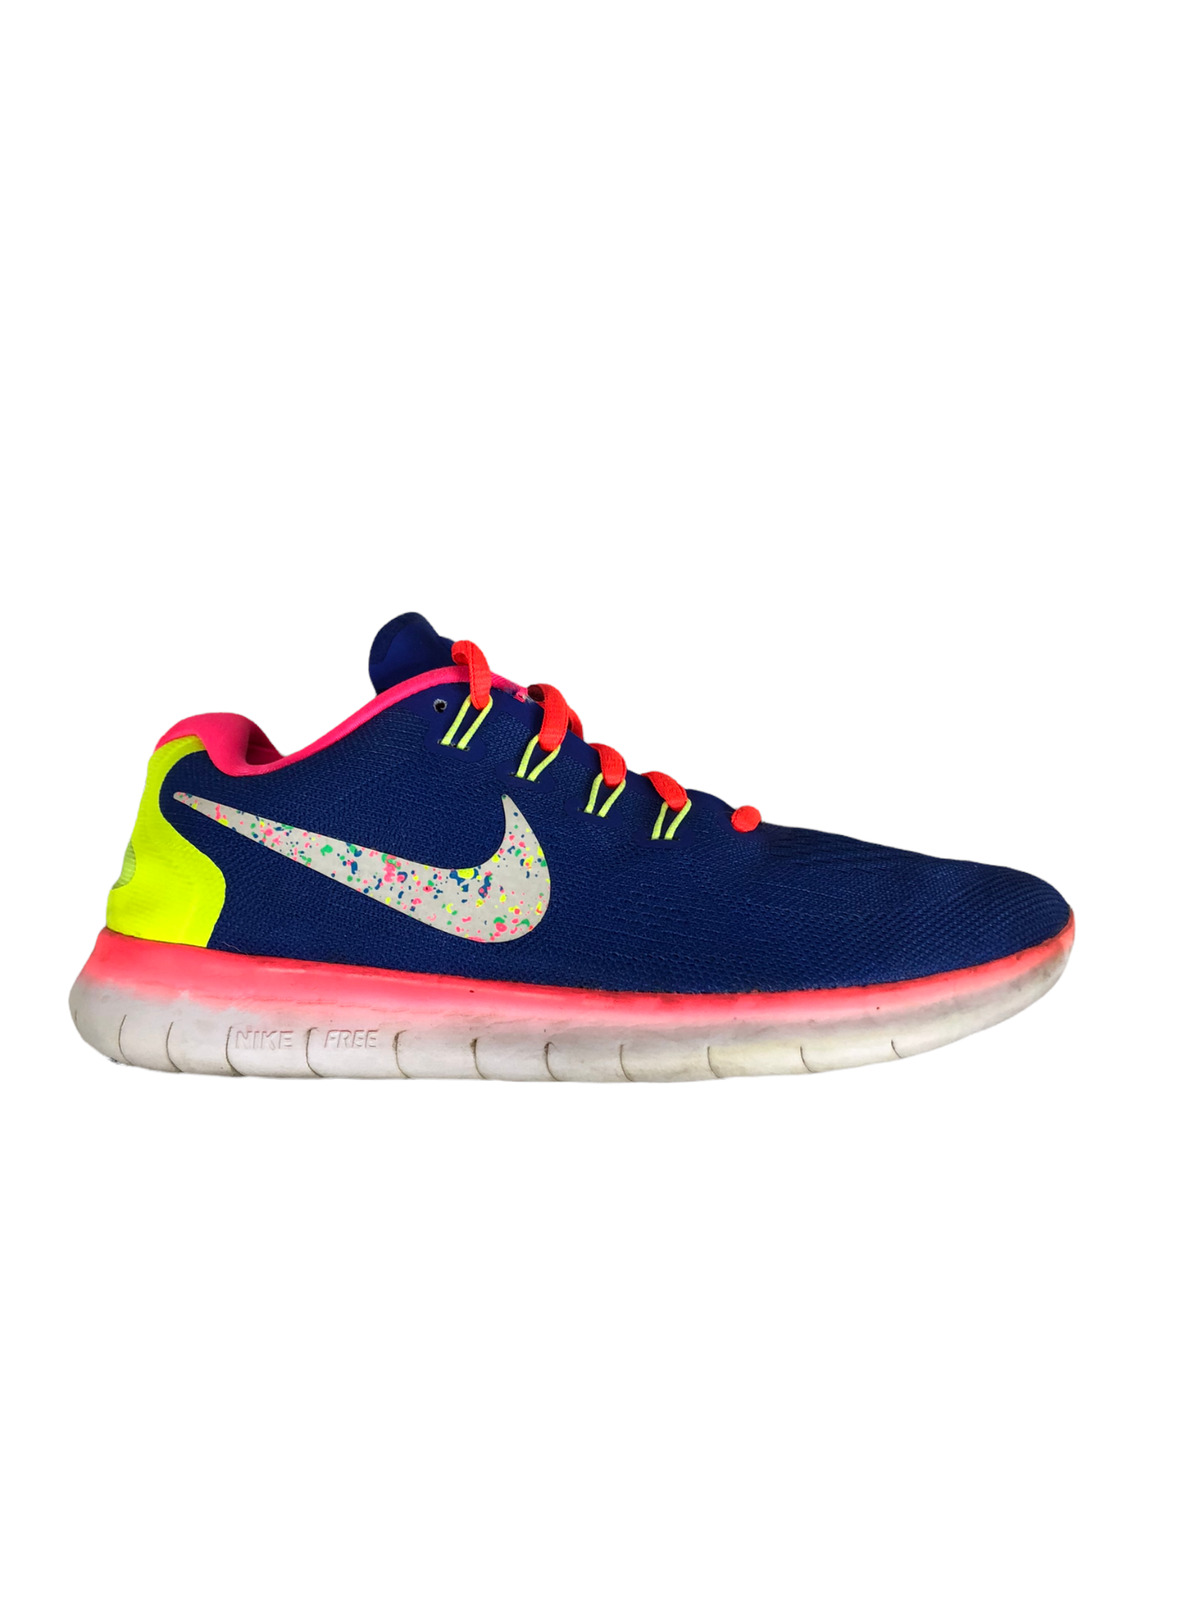 Marine The church Rooster Nike ID Free Blue Pink Training Running Shoes Women's (Size: 7) AA1613-991  | eBay